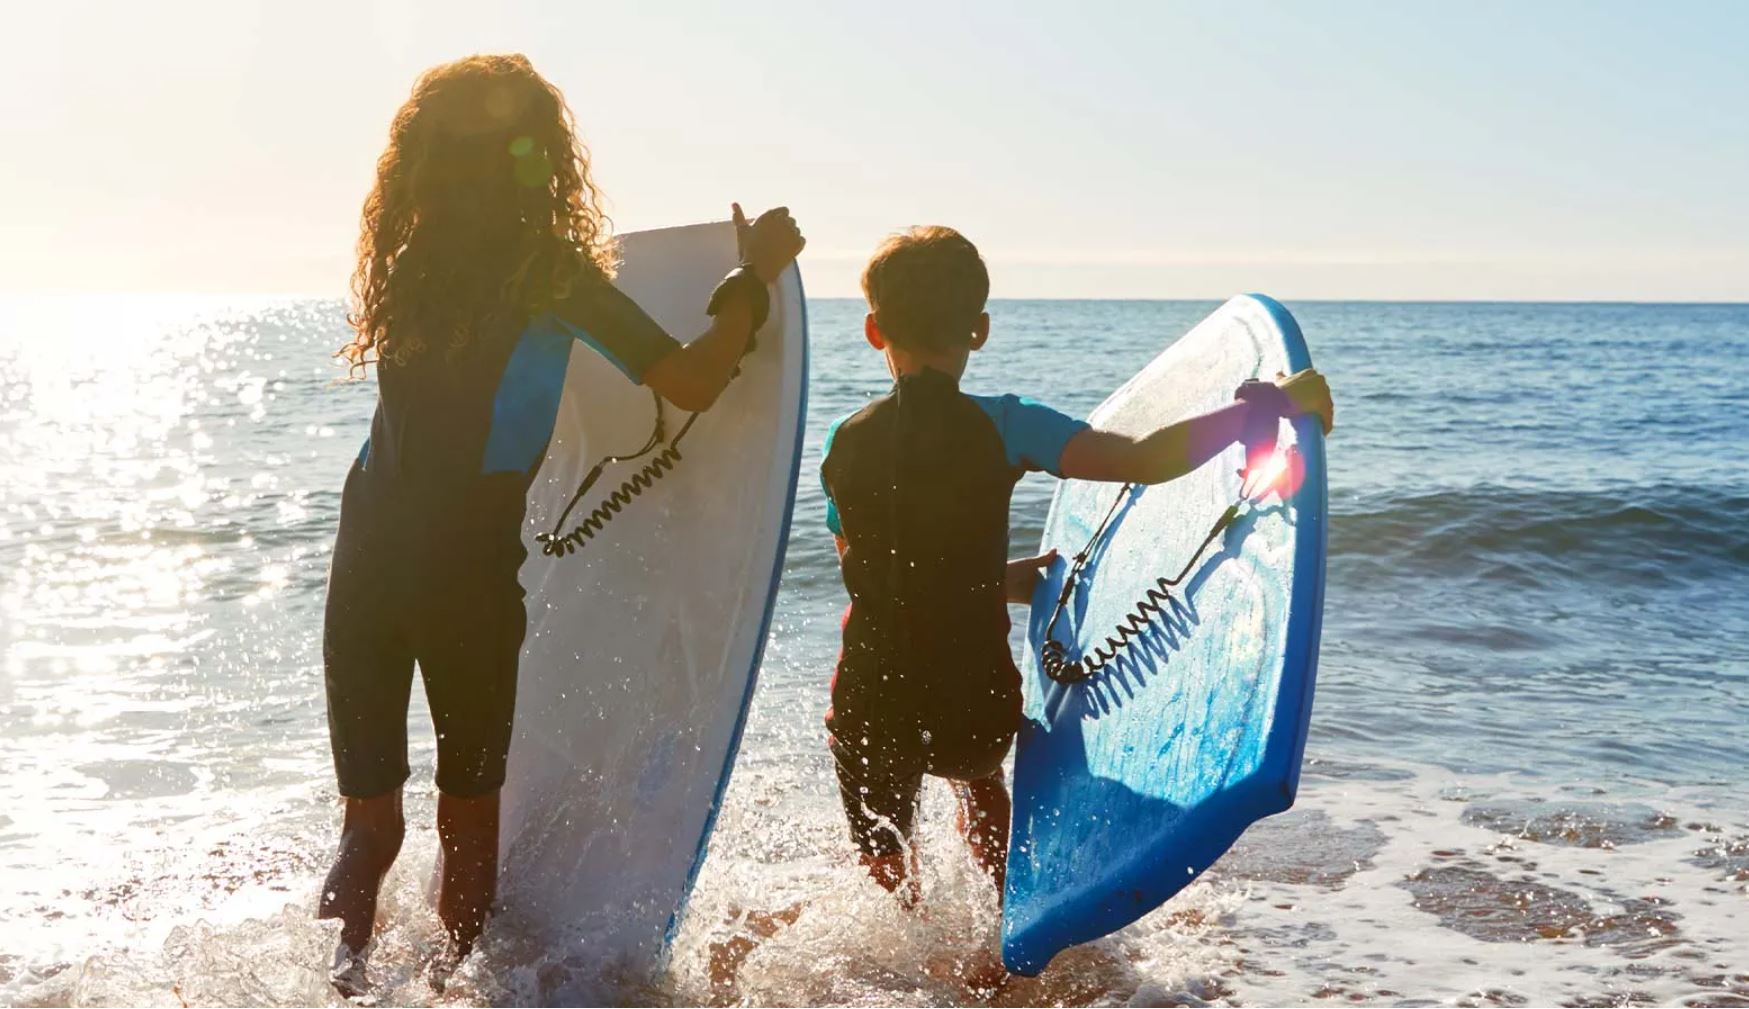 Two kids holding surboards by the water